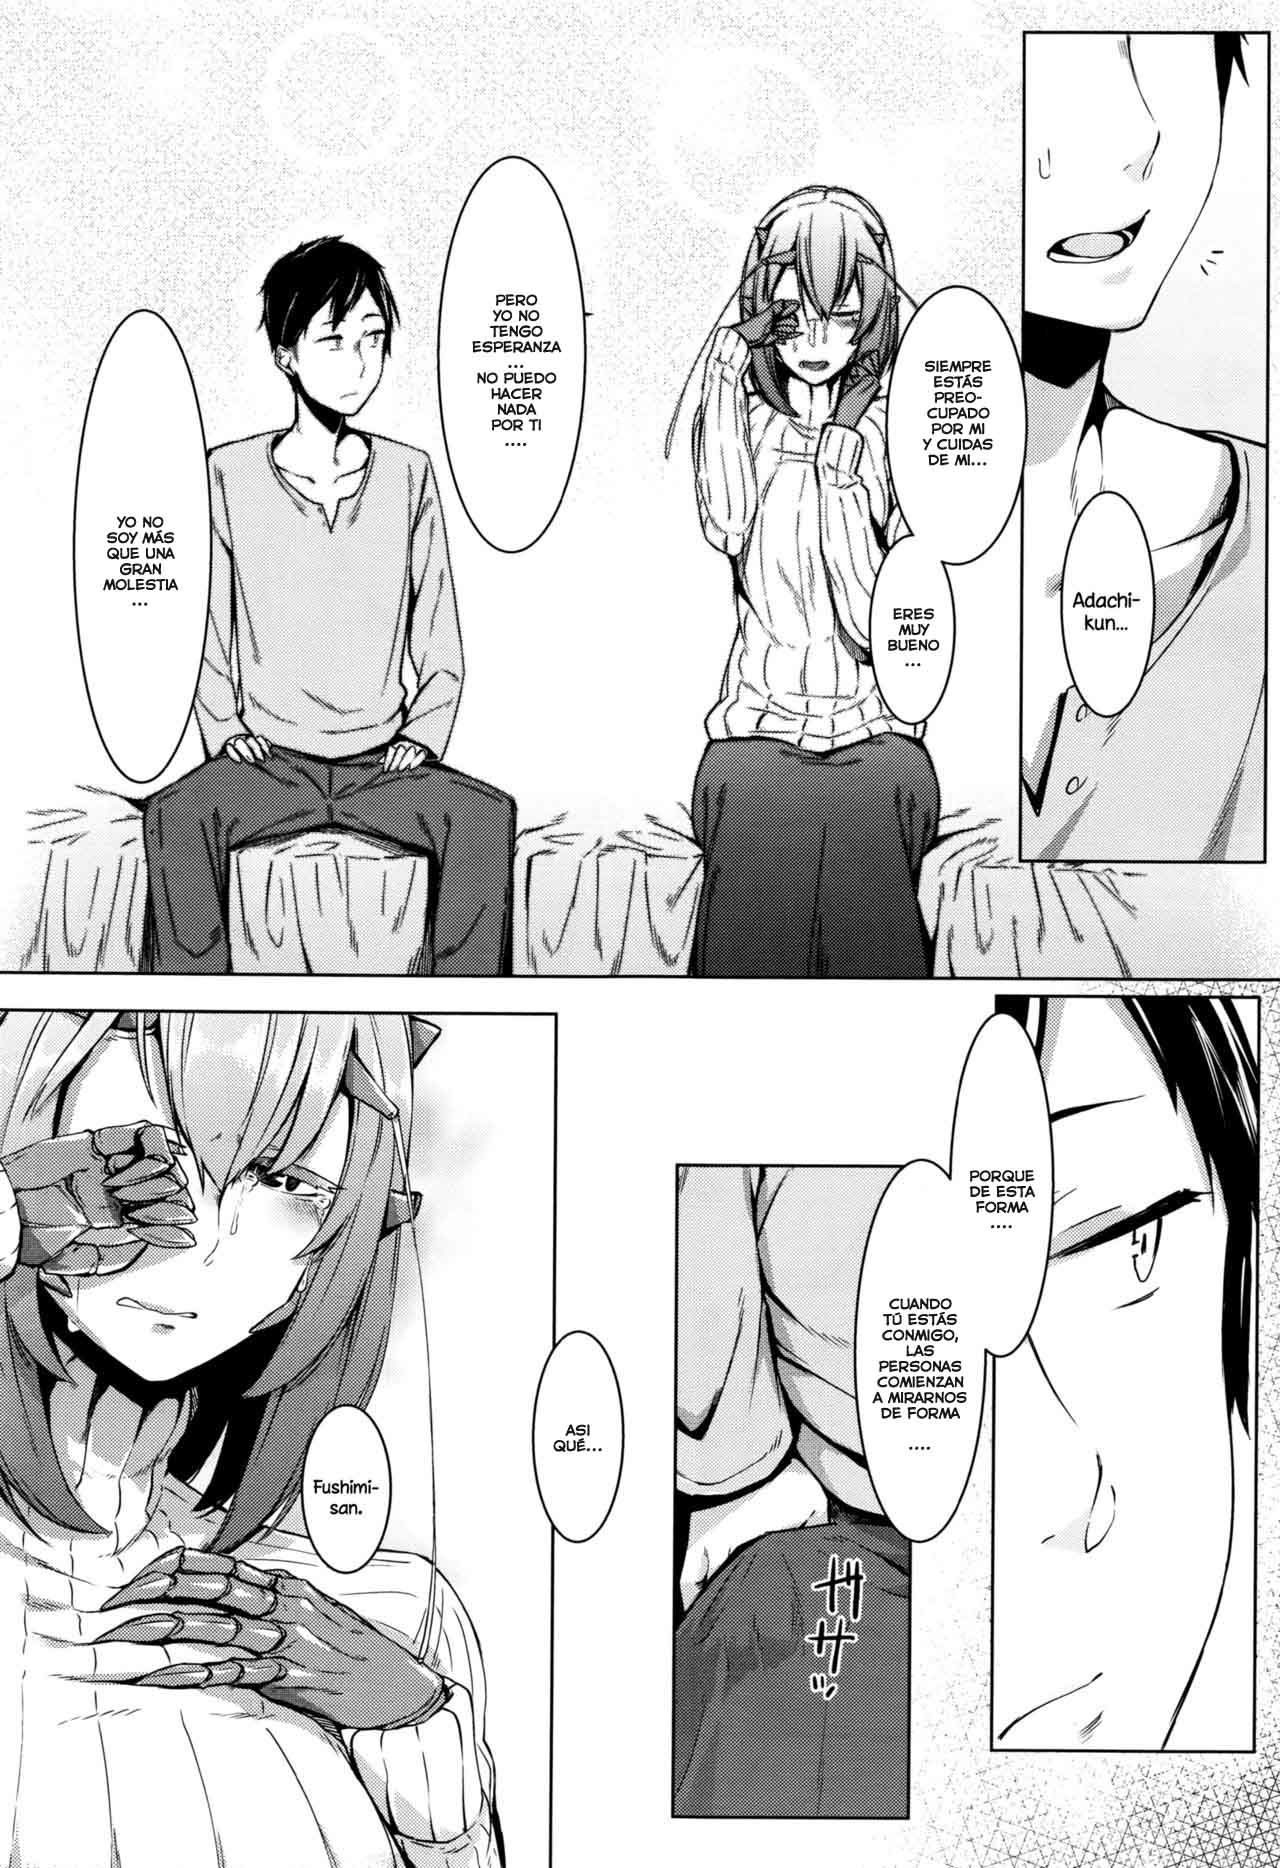 Love s"T"ickness girl (Insect Girl) - Capitulo 1 - 6